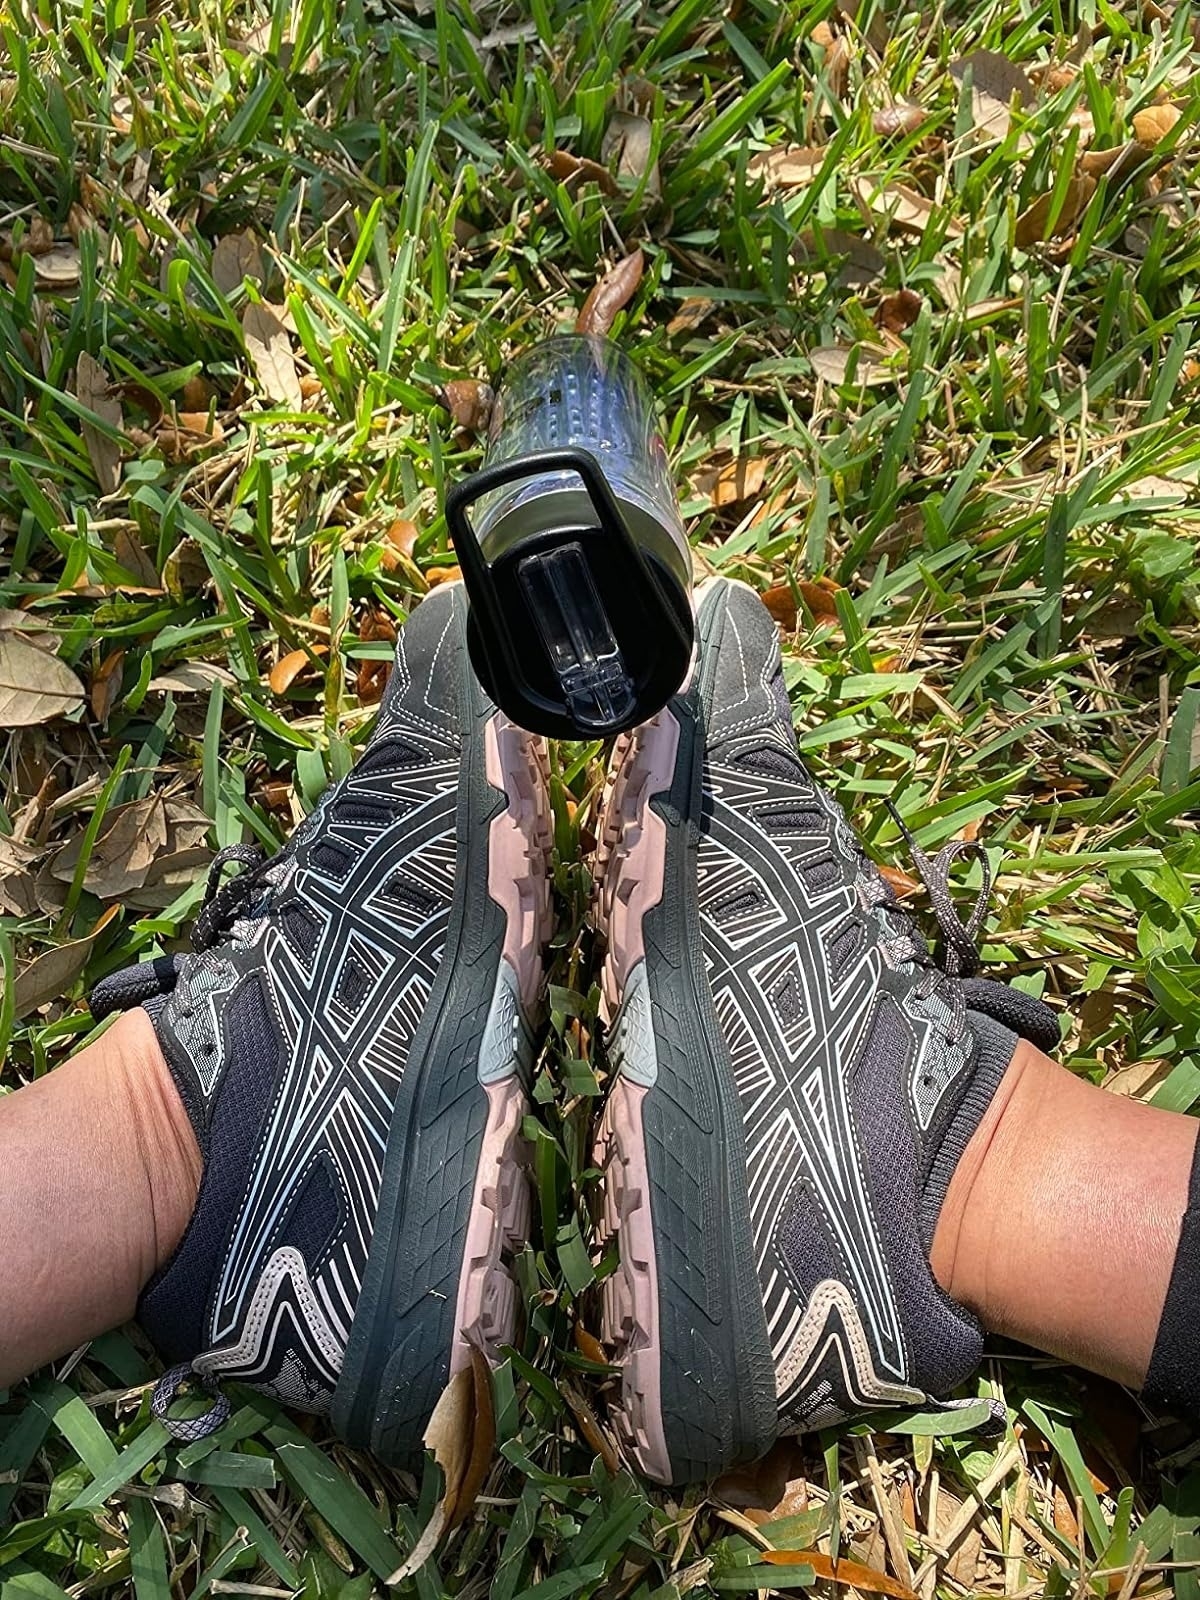 Workout shoes on grass with a portable speaker attached to one shoe